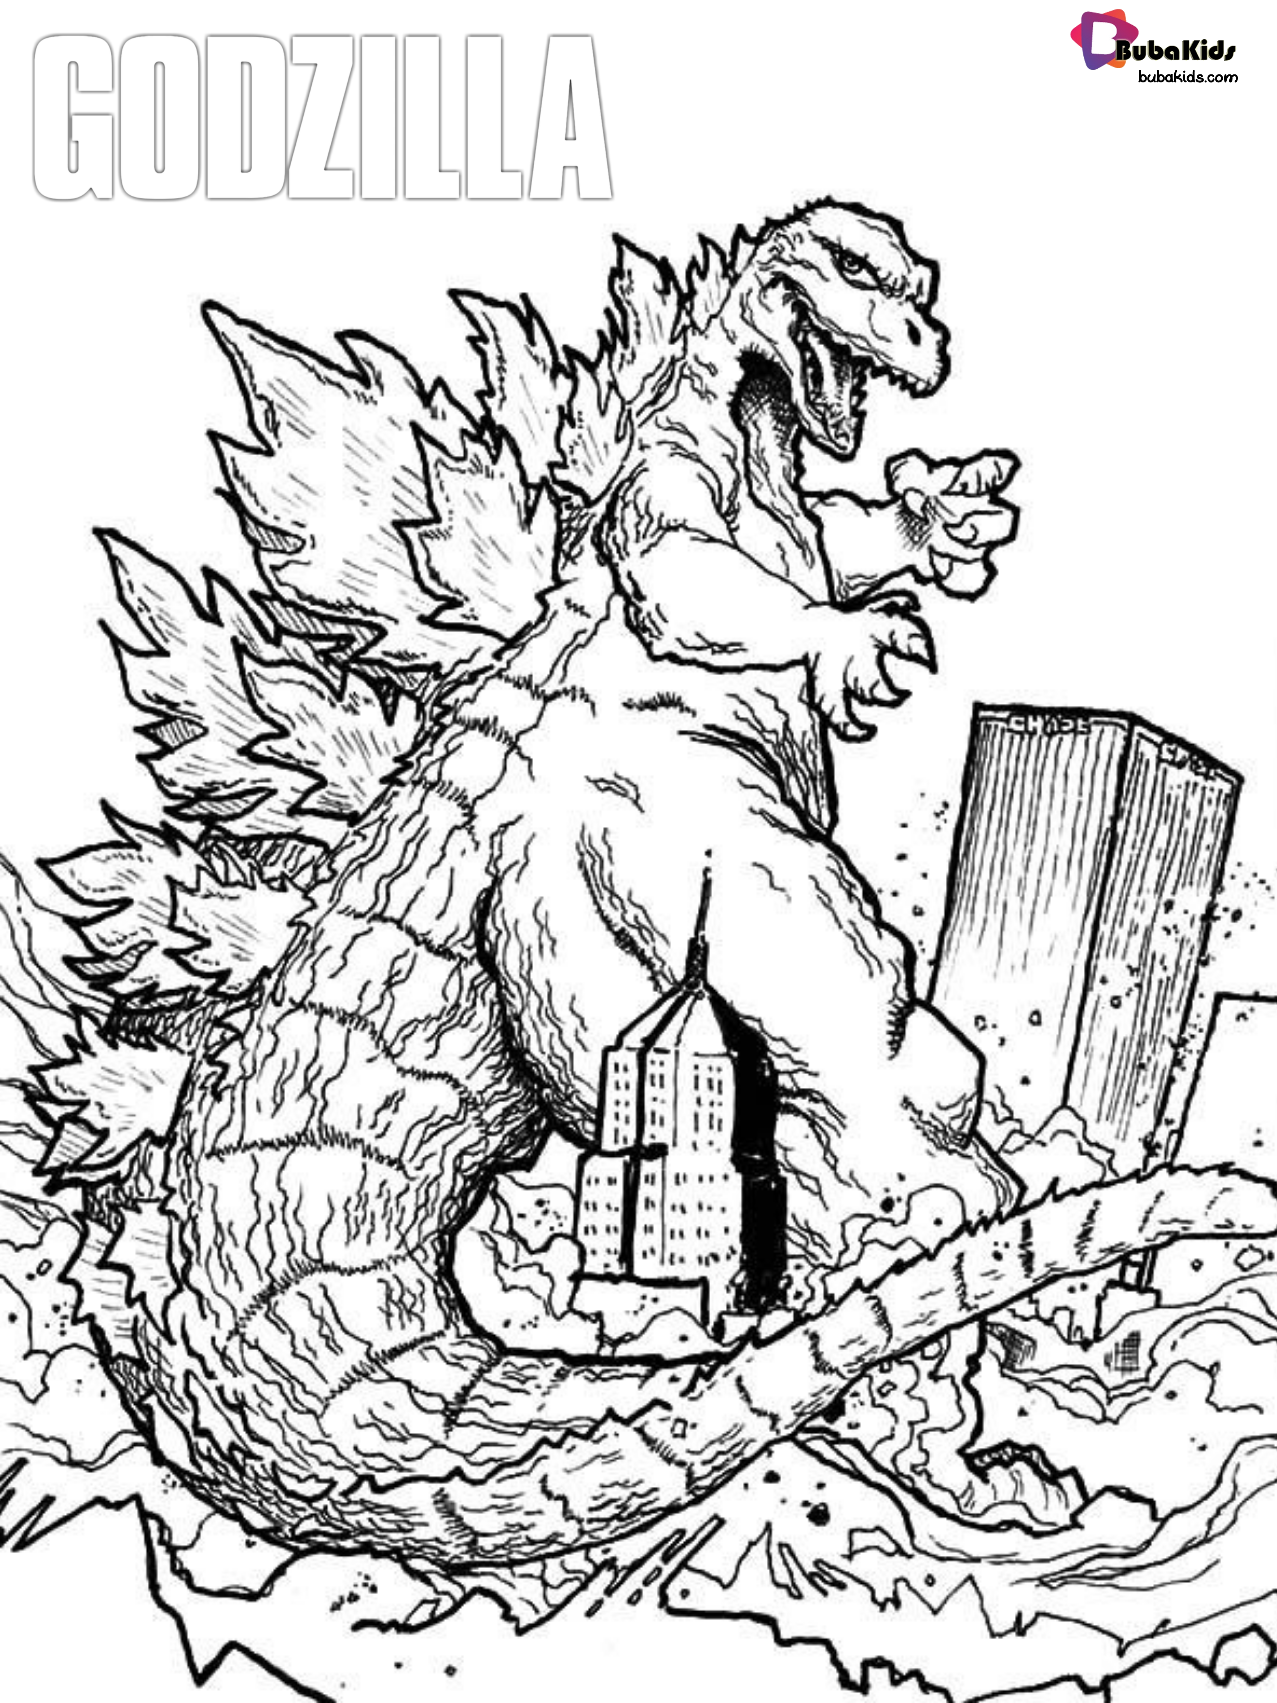 Godzilla in New York city coloring page free and printable. Wallpaper